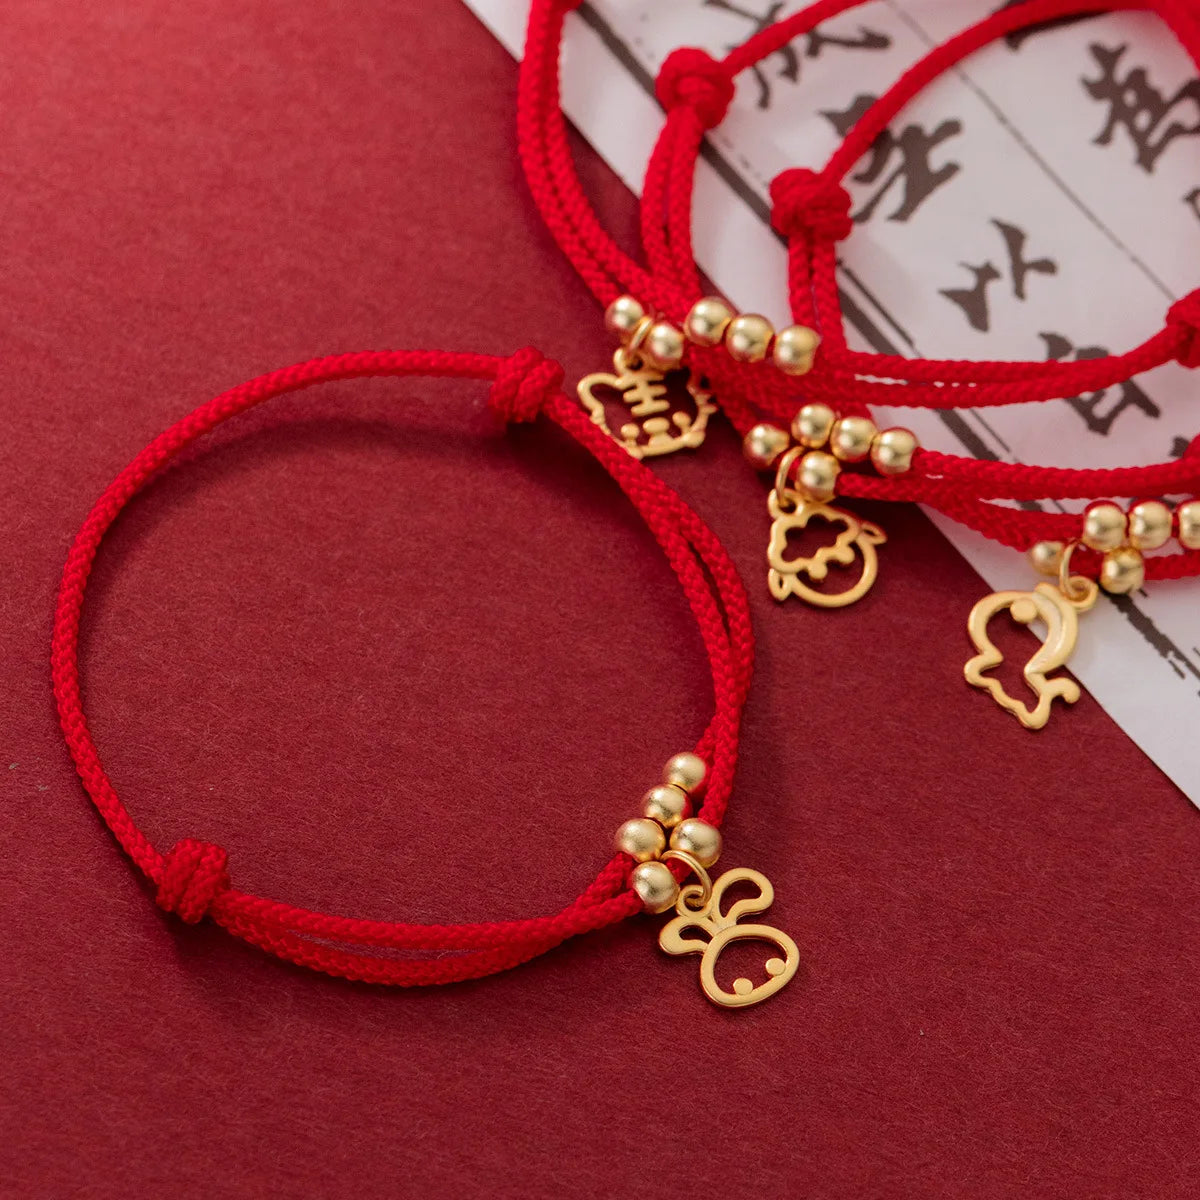 INZATT Real 925 Sterling Silver The Twelve Chinese Zodiac Signs Red Rope Bracelet for Women Classic Tiger Animal Fine Jewelry